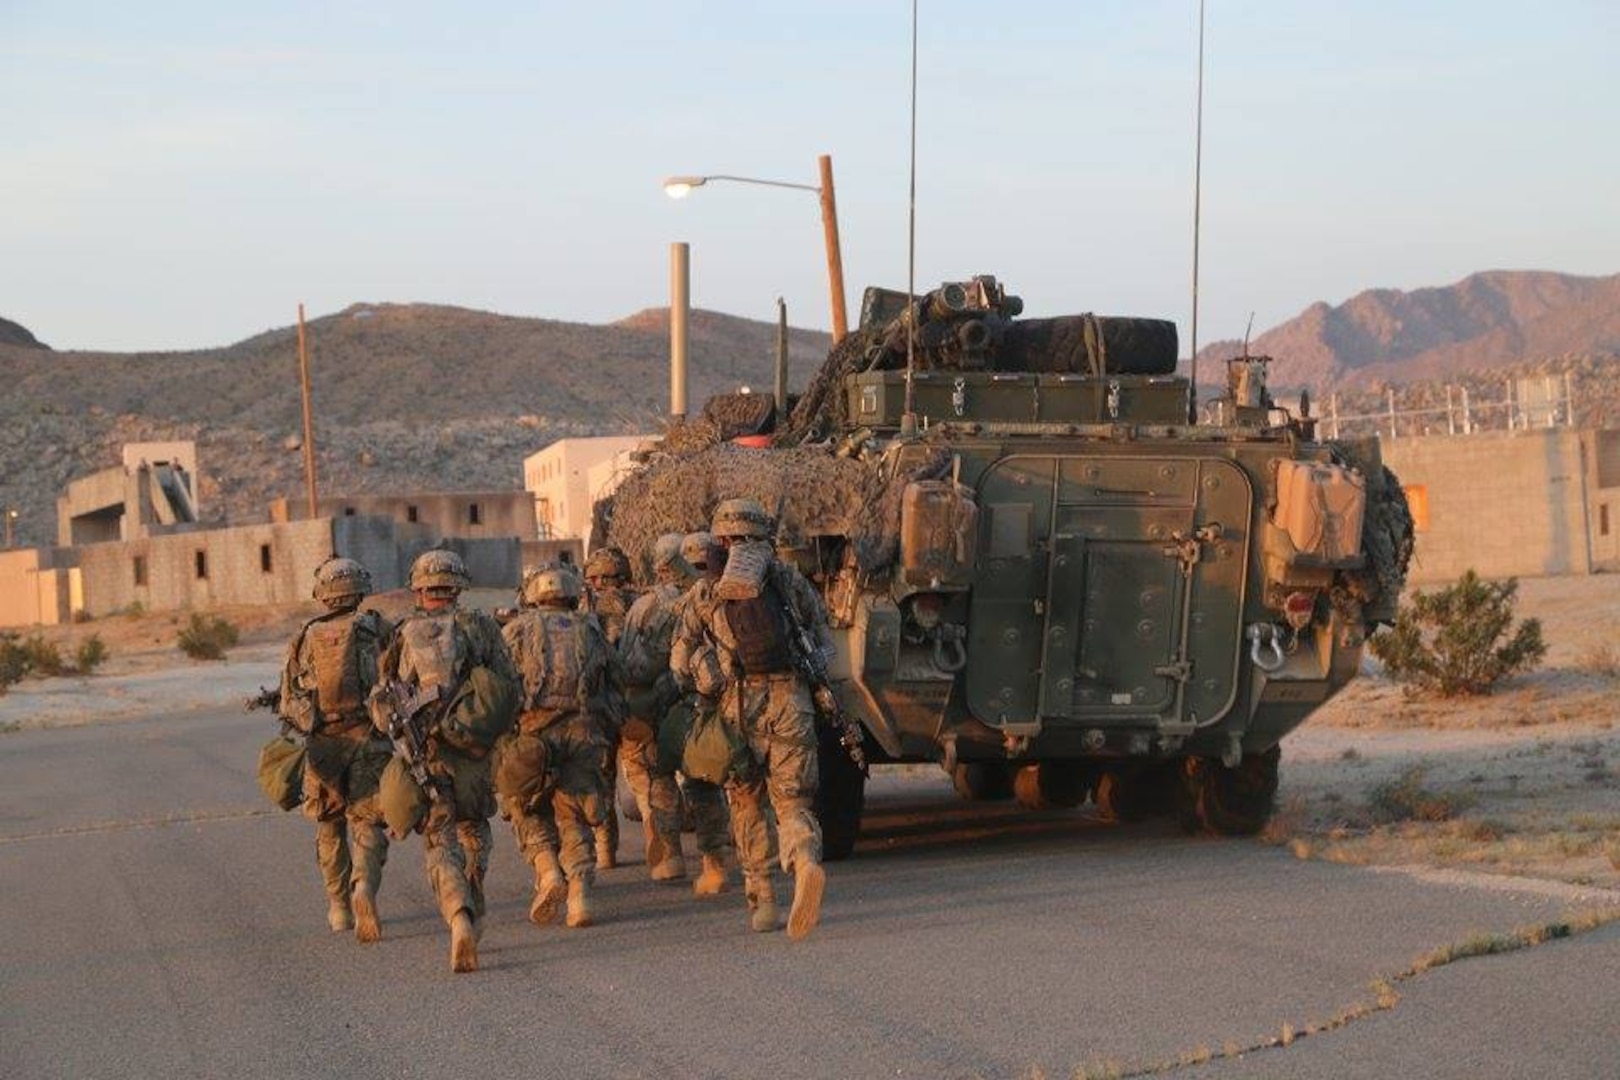 Soldiers assigned to 1st Battalion, 23rd Infantry Regiment, 1-2 Stryker Brigade Combat Team, take cover behind a Stryker, while clearing a city during Decisive Action Rotation 16-06 at the National Training Center in Fort Irwin, Calif., May 11, 2016. The training focused on the 1-2 SBCT combating a near-peer enemy and smaller militant groups in a foreign country. (U.S. Army Photo by Spc. Kyle Edwards, Operations Group, National Training Center)